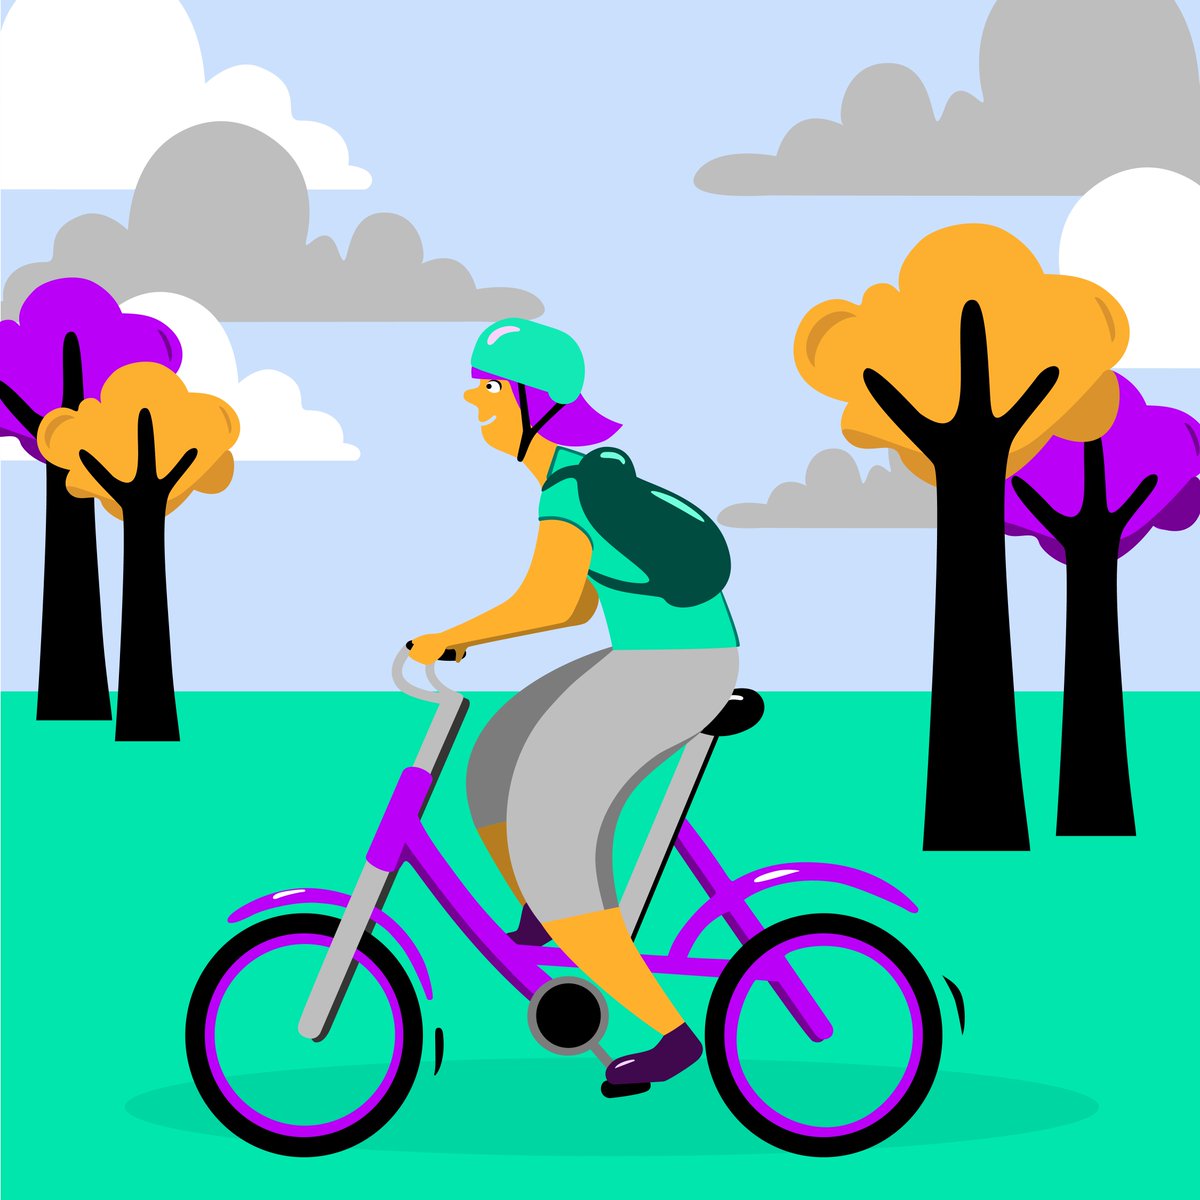 A reminder of all the benefits of cycling in your town/city from #sustrans:
🚲 Helping people to live healthier lifestyles
🚲 Reduction of environmental emissions
🚲 Creating more people-centred environments
🚲 Reduction of congestion on roads
🚲 Lowered commuting costs